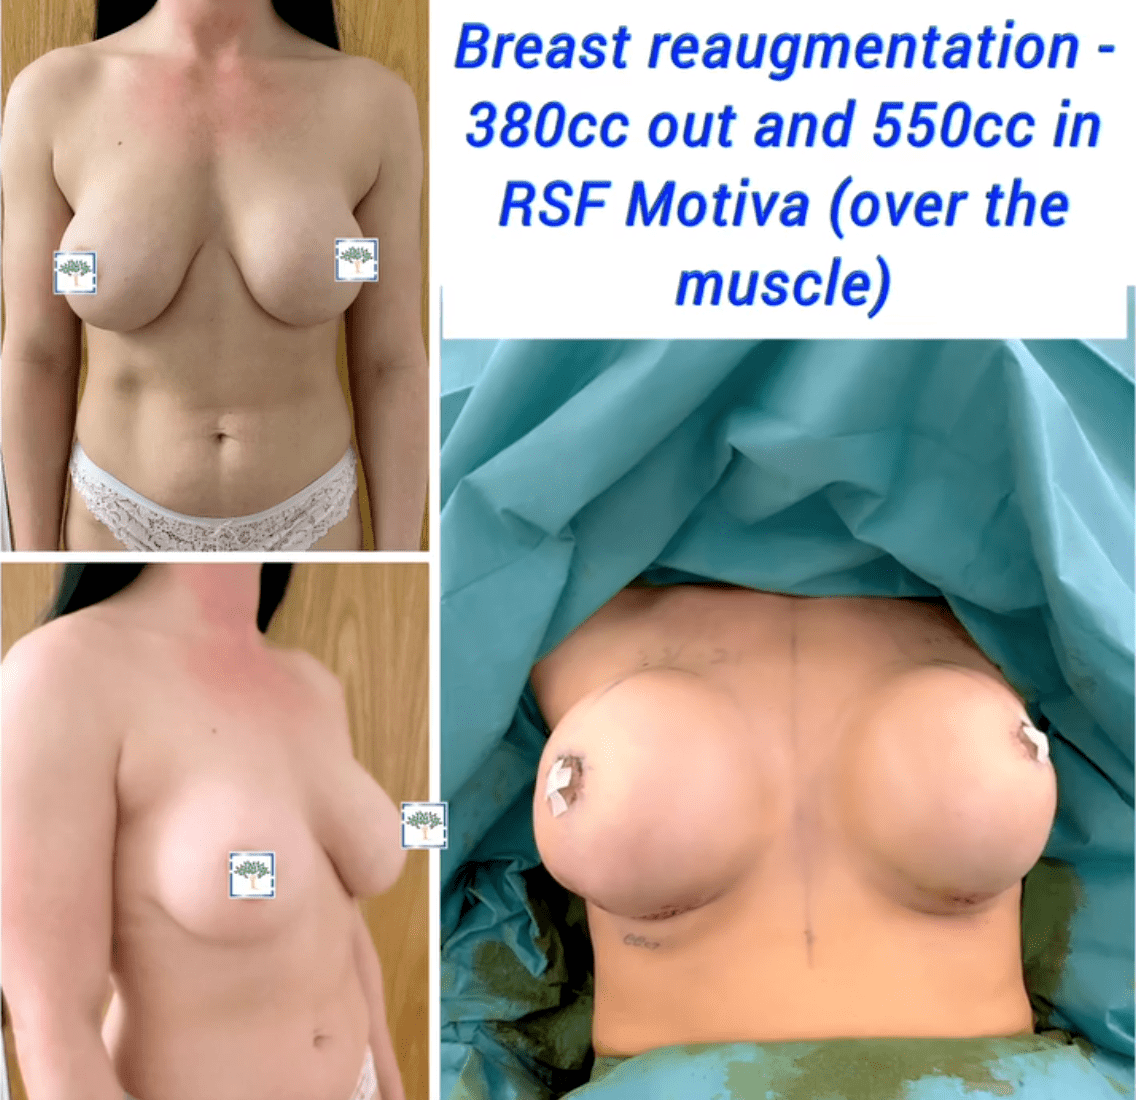 Breast re-augmentation 380cc out and 550cc in